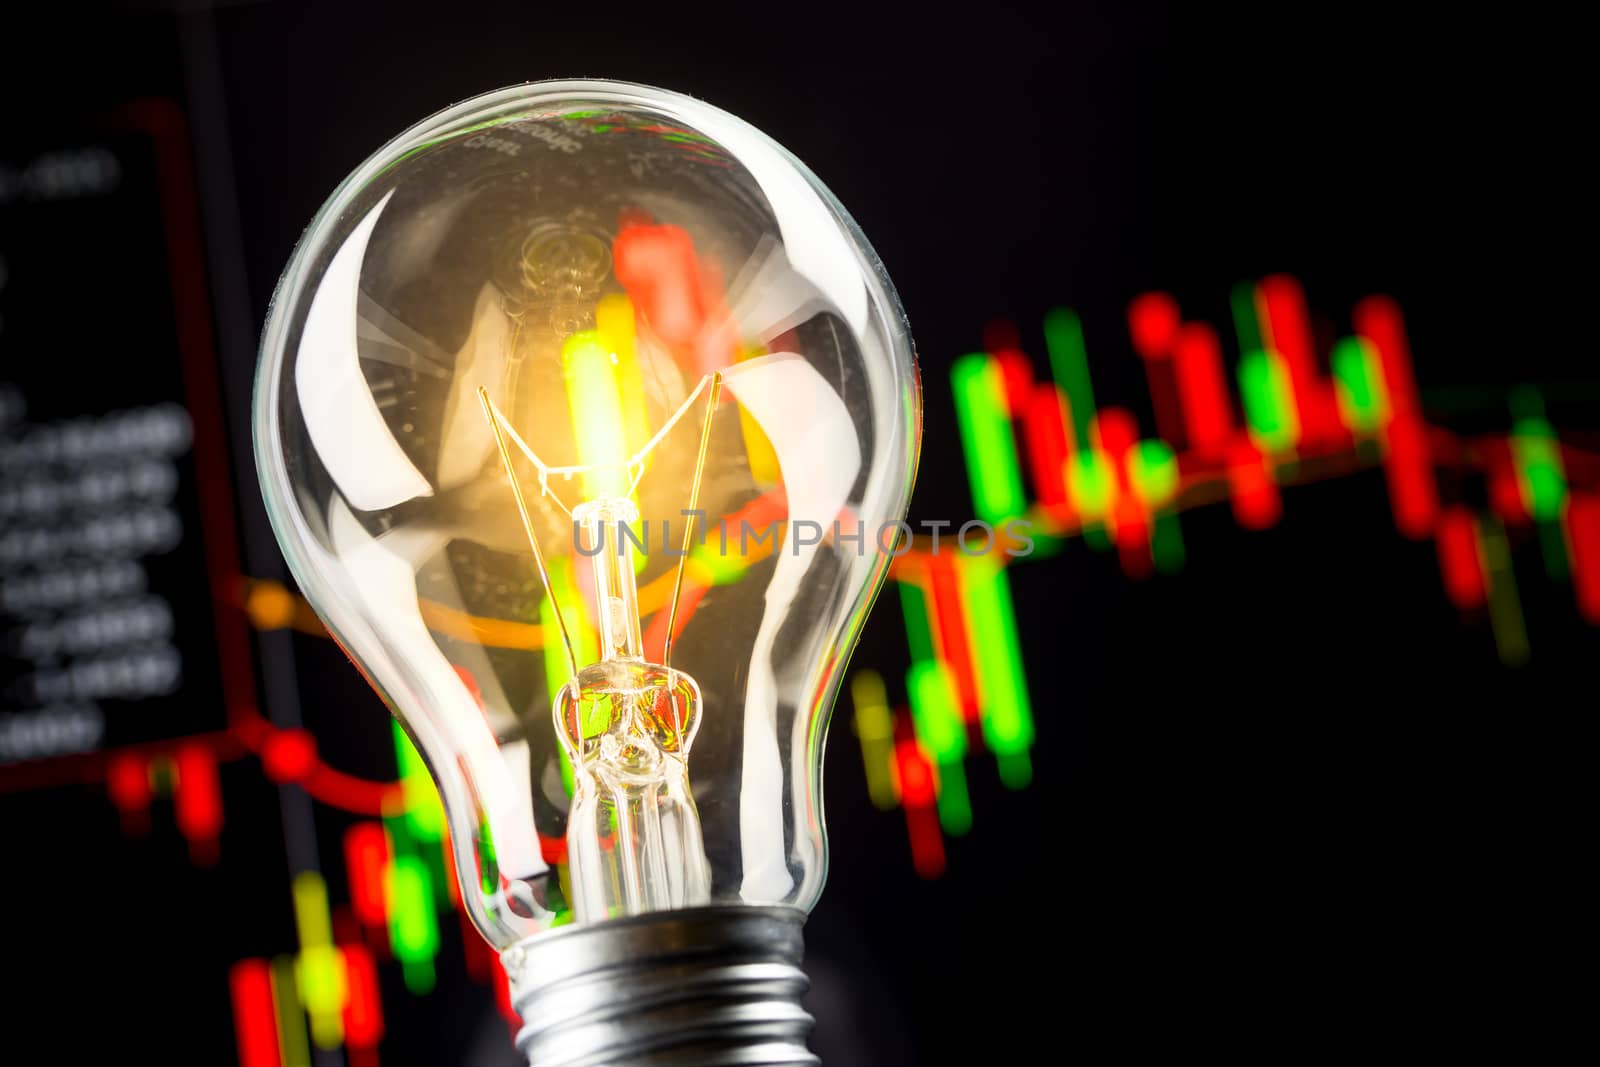 Business success with stock graph and light bulb